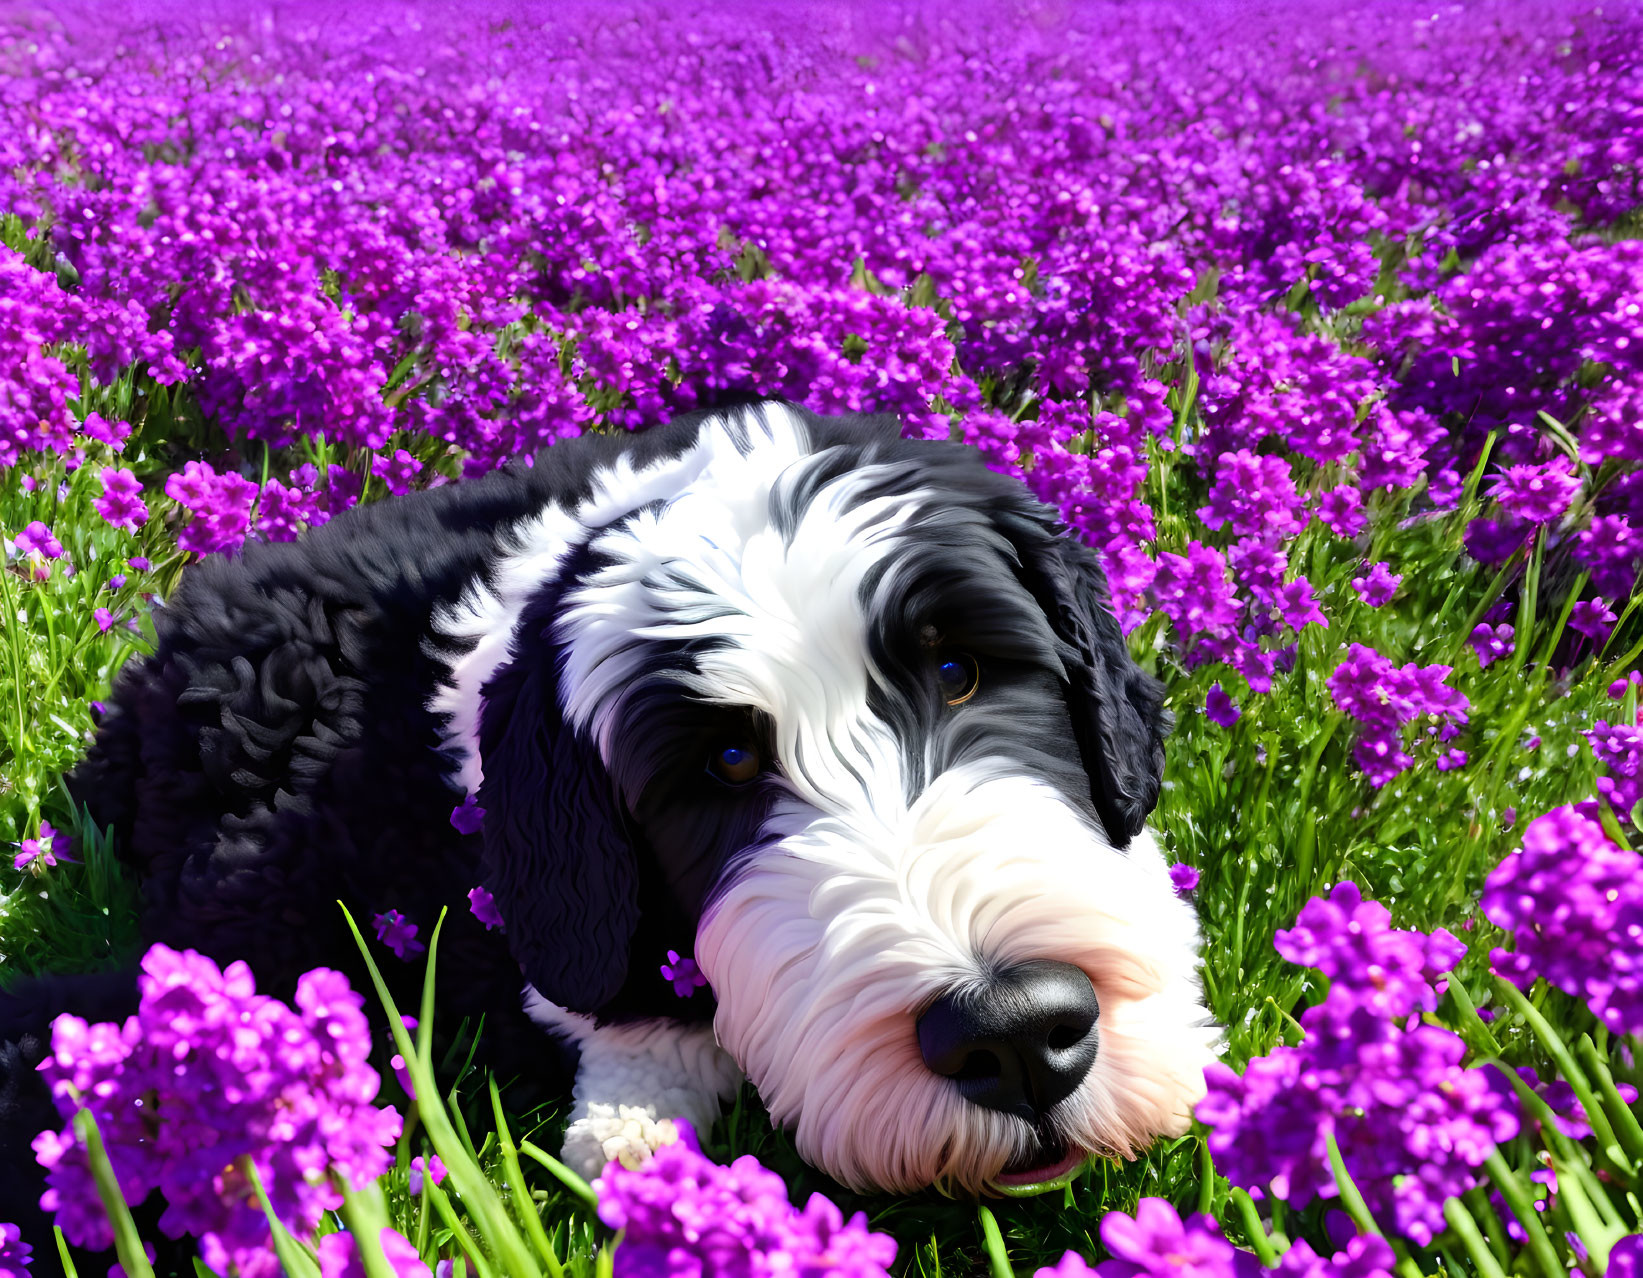 Black and White Dog Resting in Vibrant Purple Flower Field